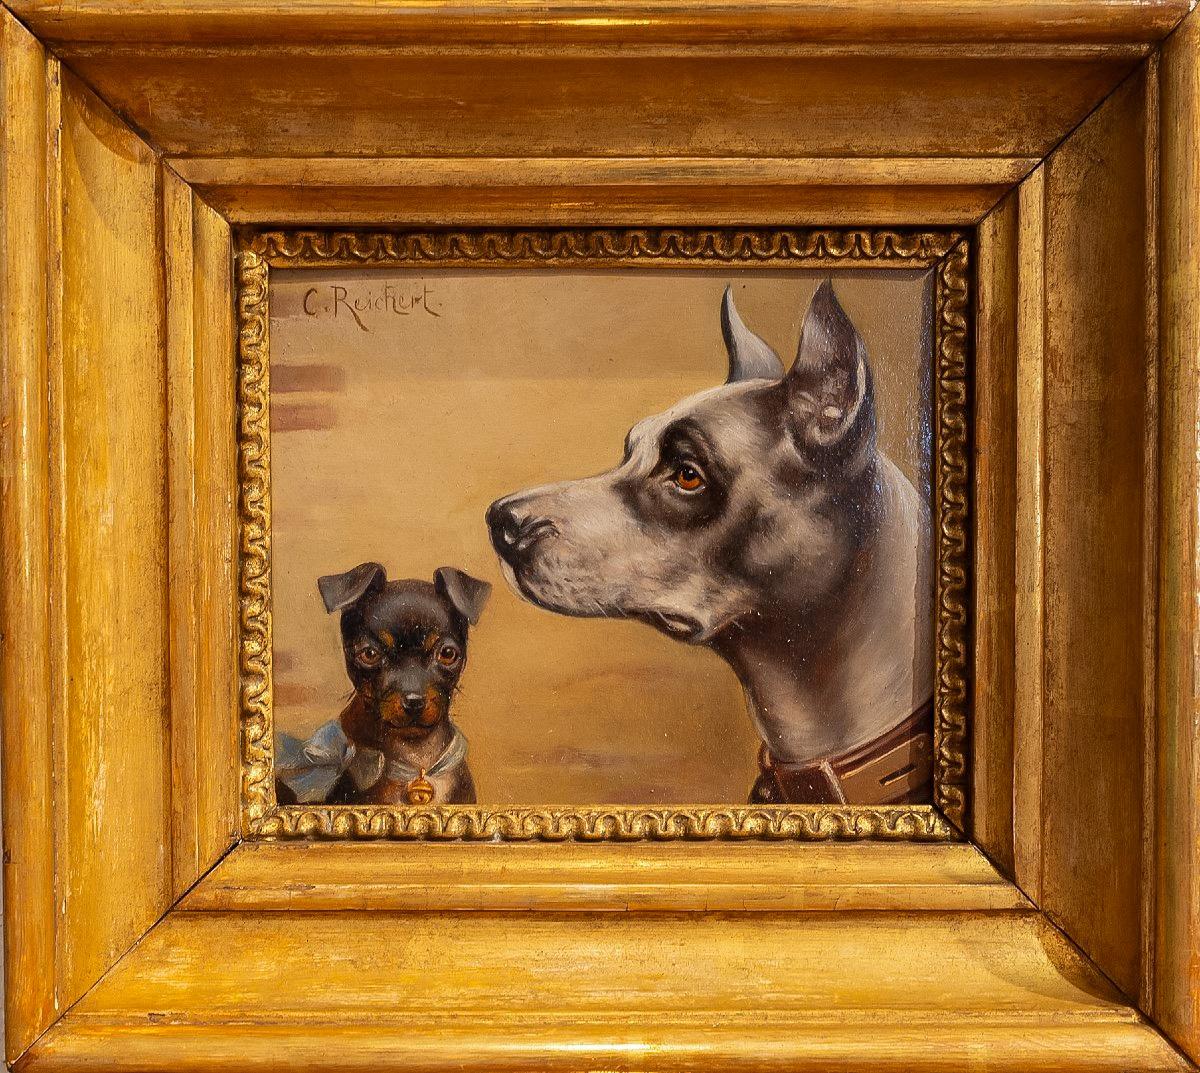 "Best of Friends" 
Carl Reichert (Austrian, 1836-1918) 
Oil on wood panel
10 5/8 x 9 1/2 inches frame size

A tenderly and well executed portrait of two dogs, best of friends, of nearly comically different proportions. Reichert was a master of